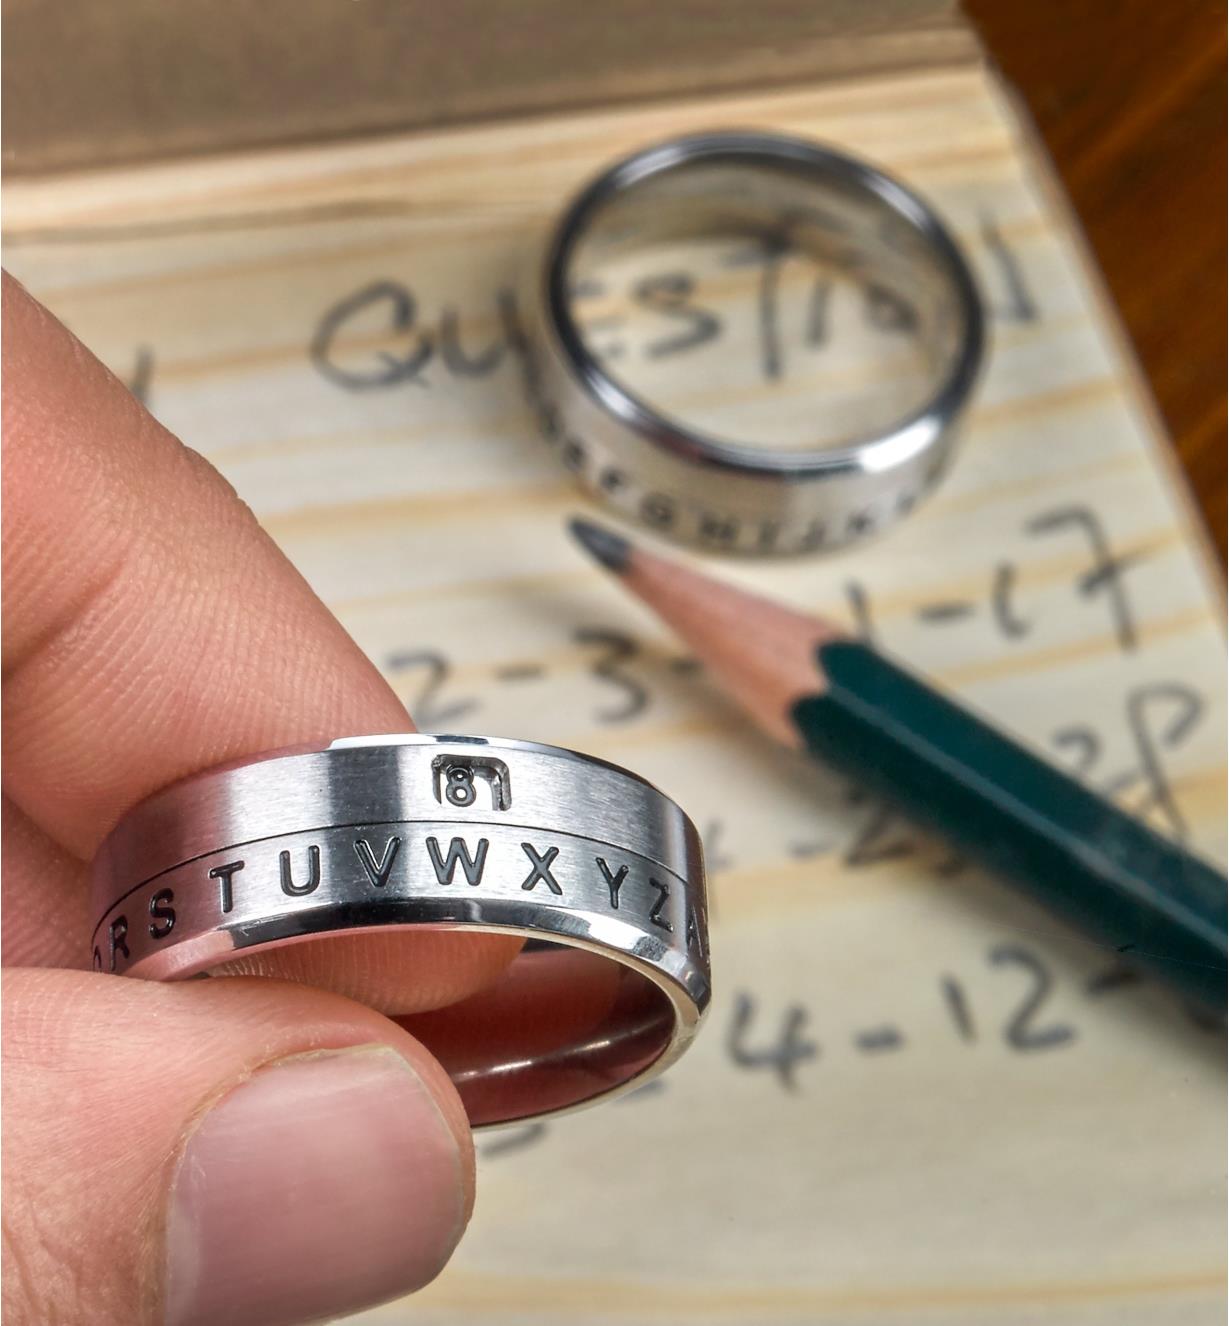 A secret decoder ring being used to encrypt a secret message